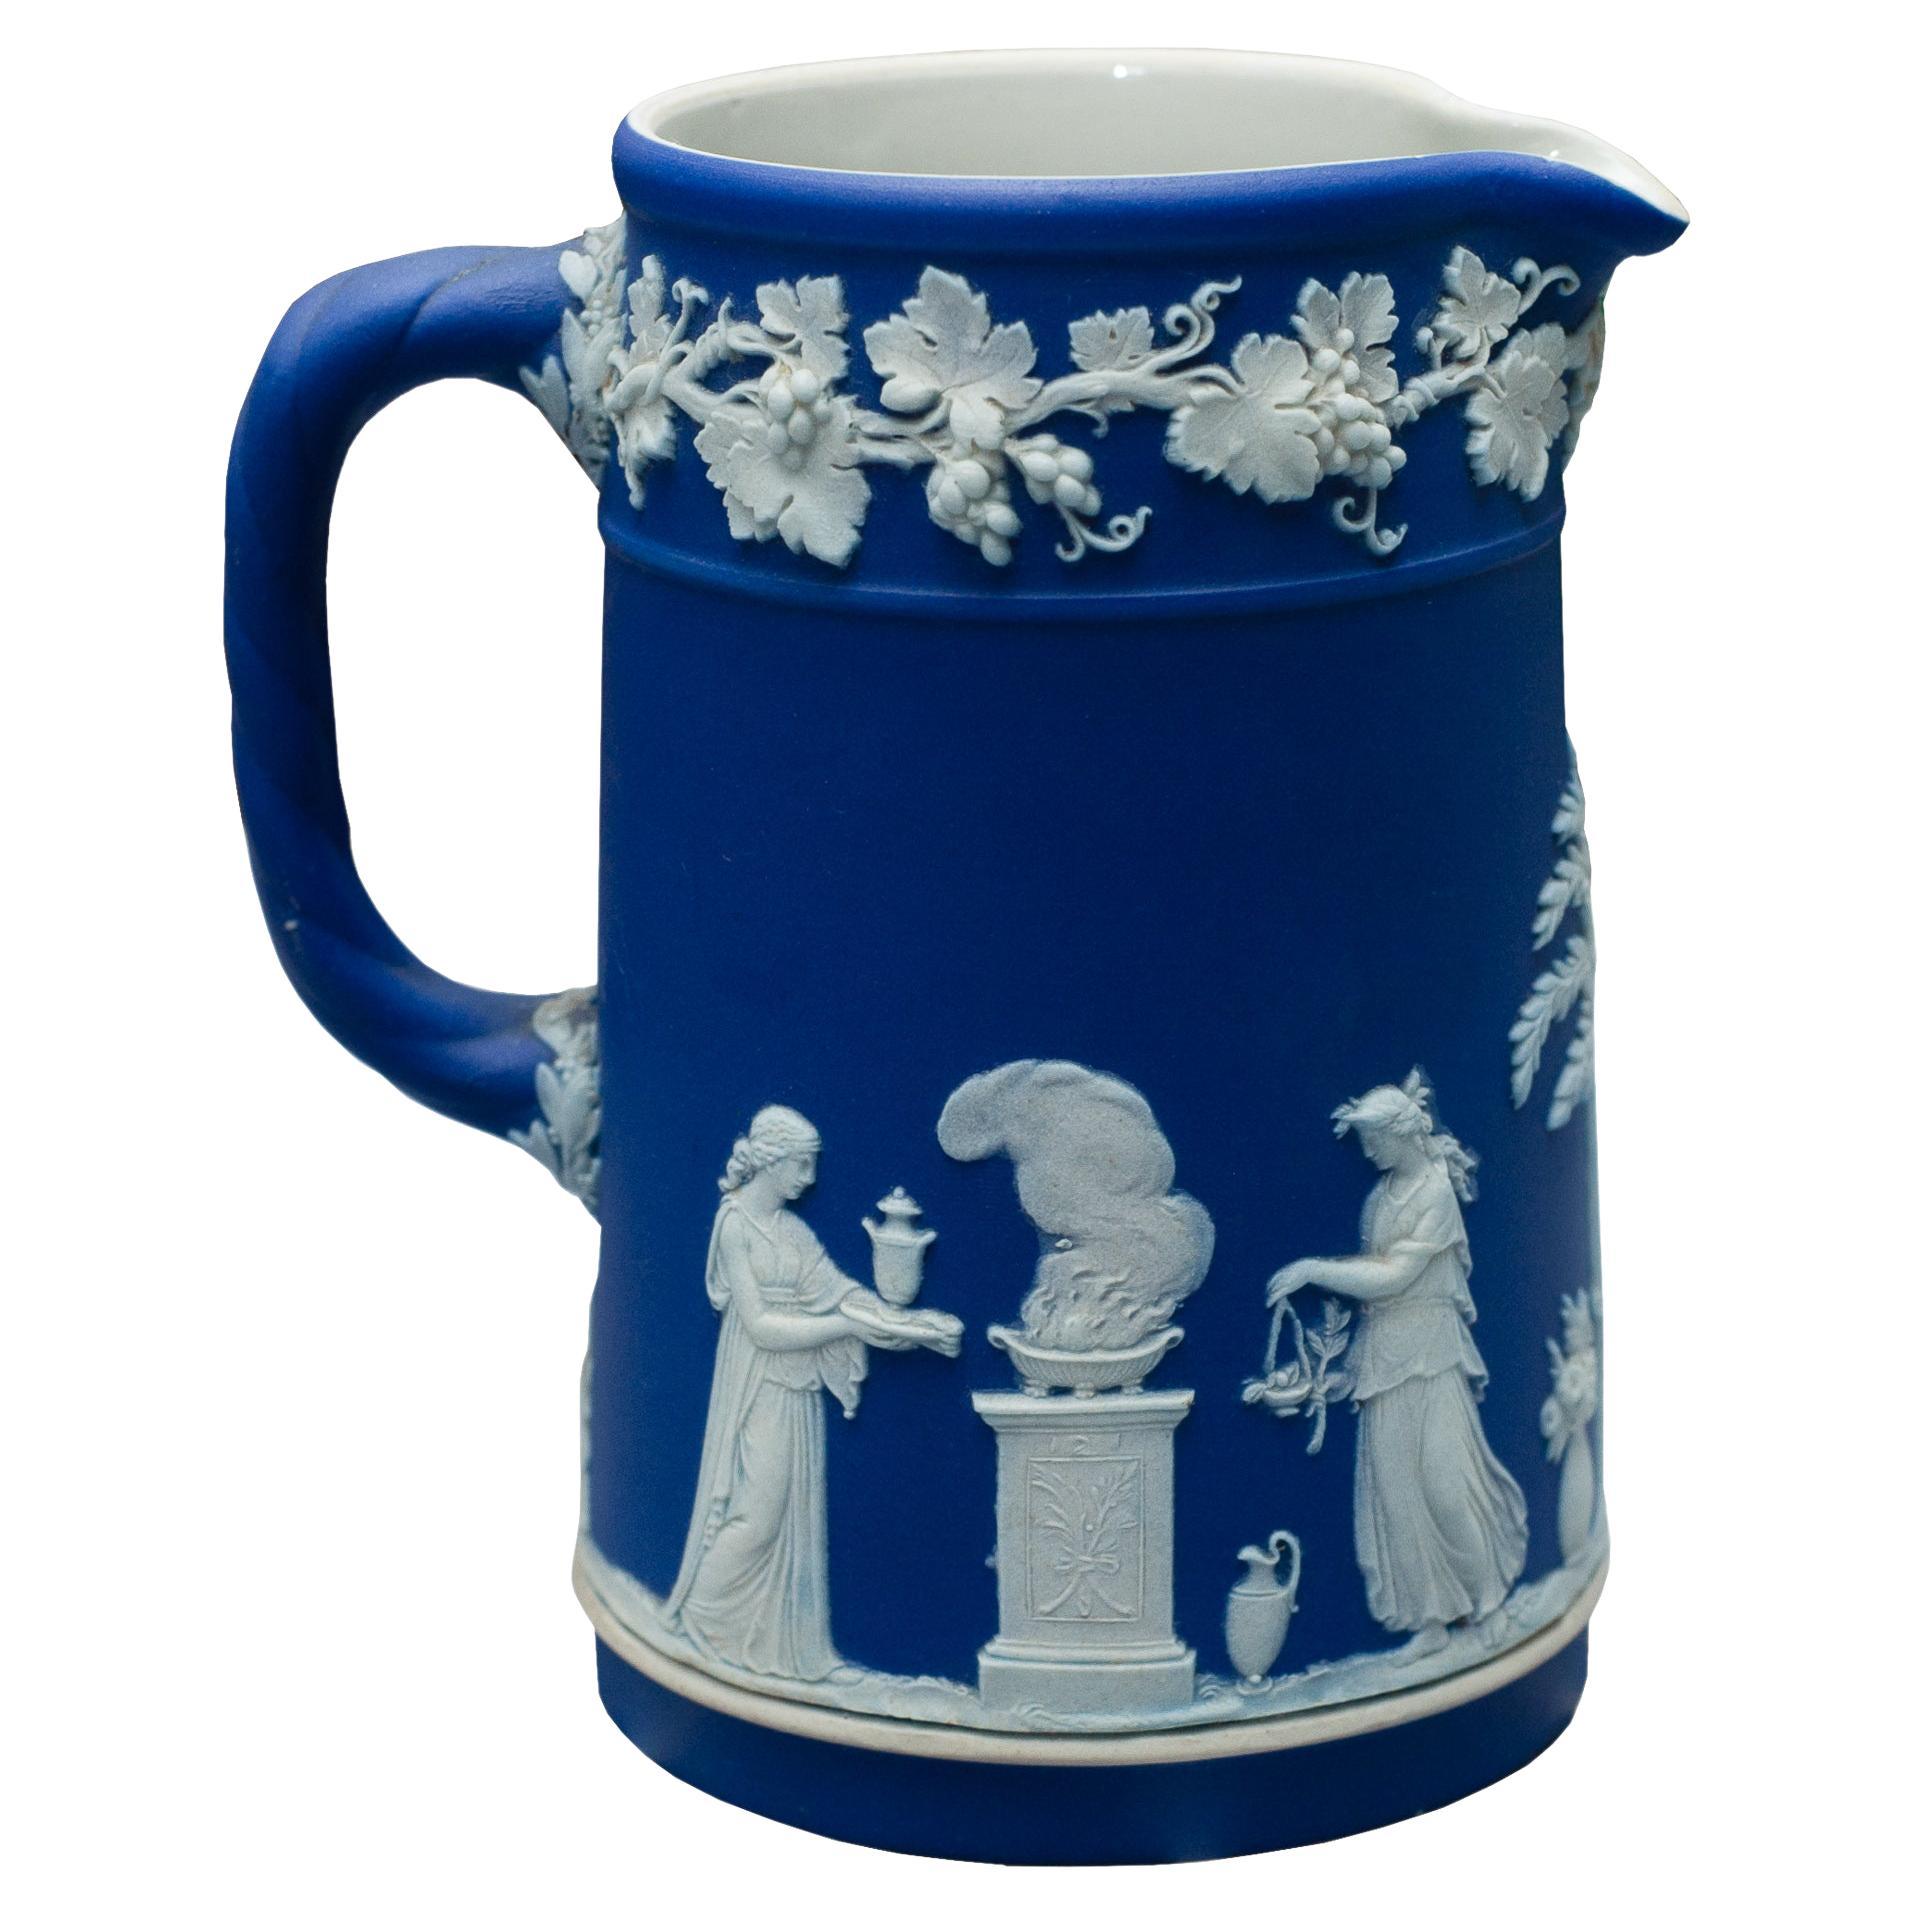 What is the Wedgwood blue named after?